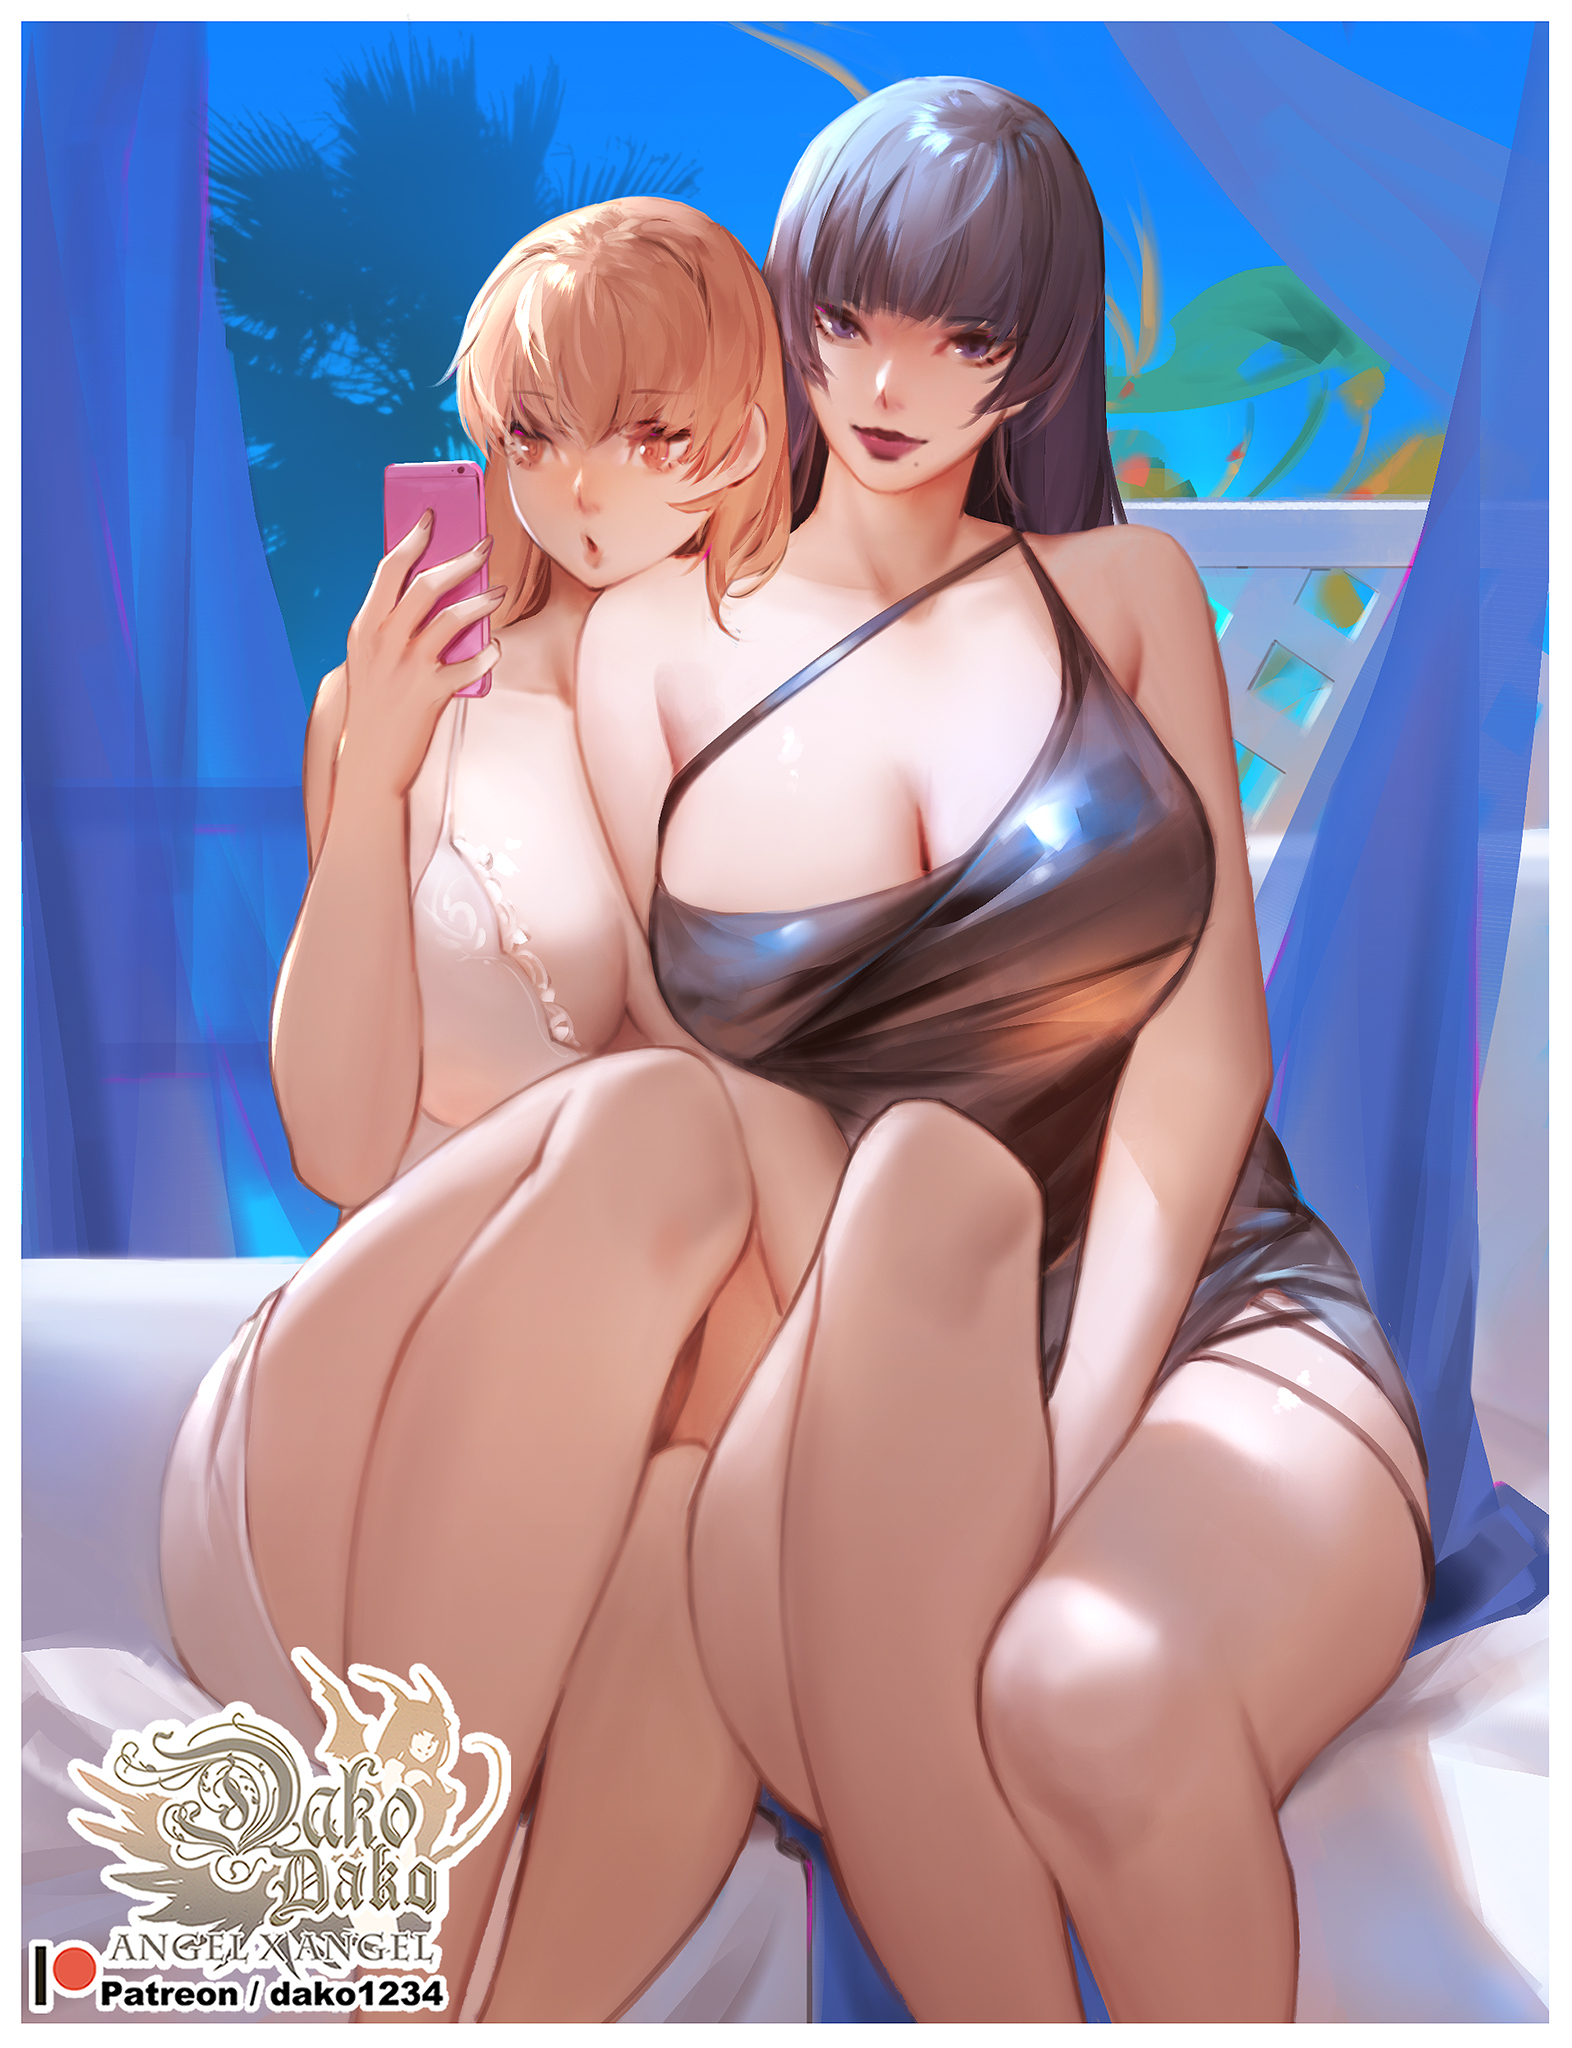 Anime 1572x2048 anime anime girls DAKO Dead or Alive big boobs cleavage two women portrait display dress Nyotengu (Dead or Alive) Kasumi (Dead or Alive) boobs huge breasts curvy smartphone thighs video games video game girls video game warriors video game characters